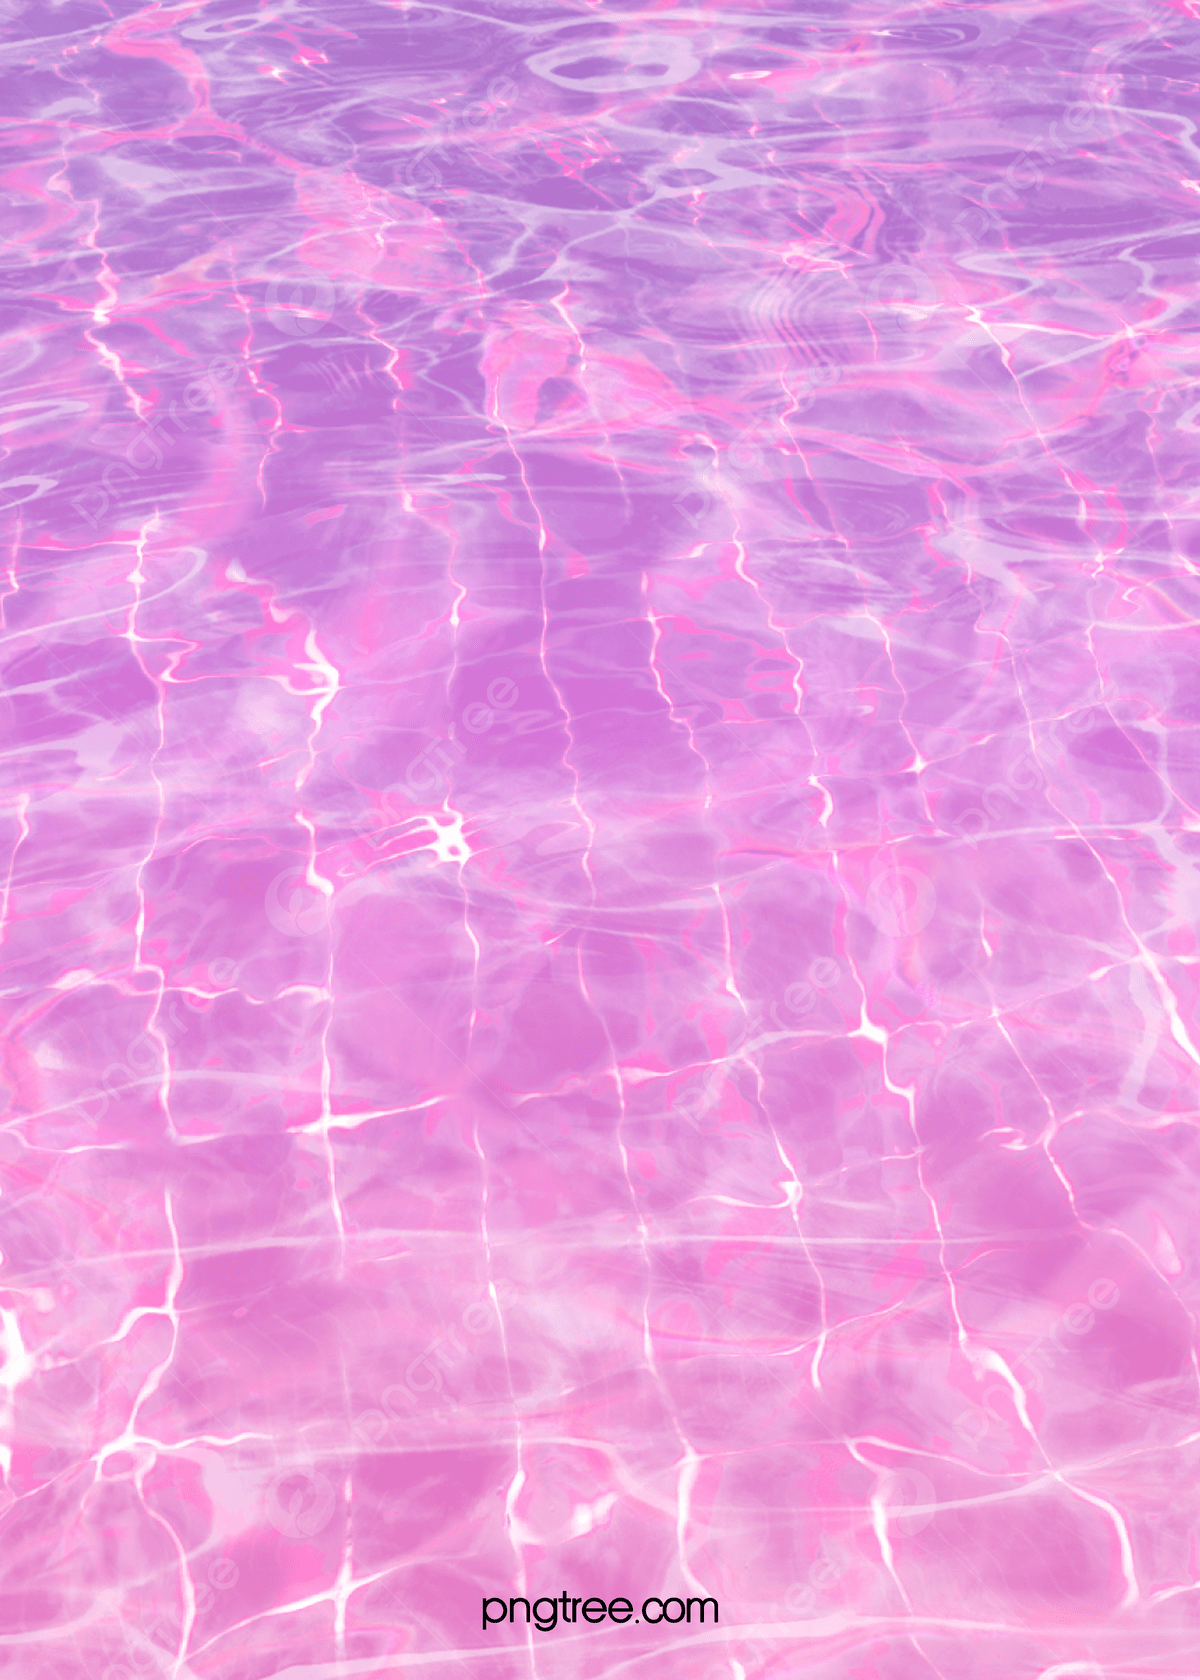 A pink water background with white lines - Swimming pool